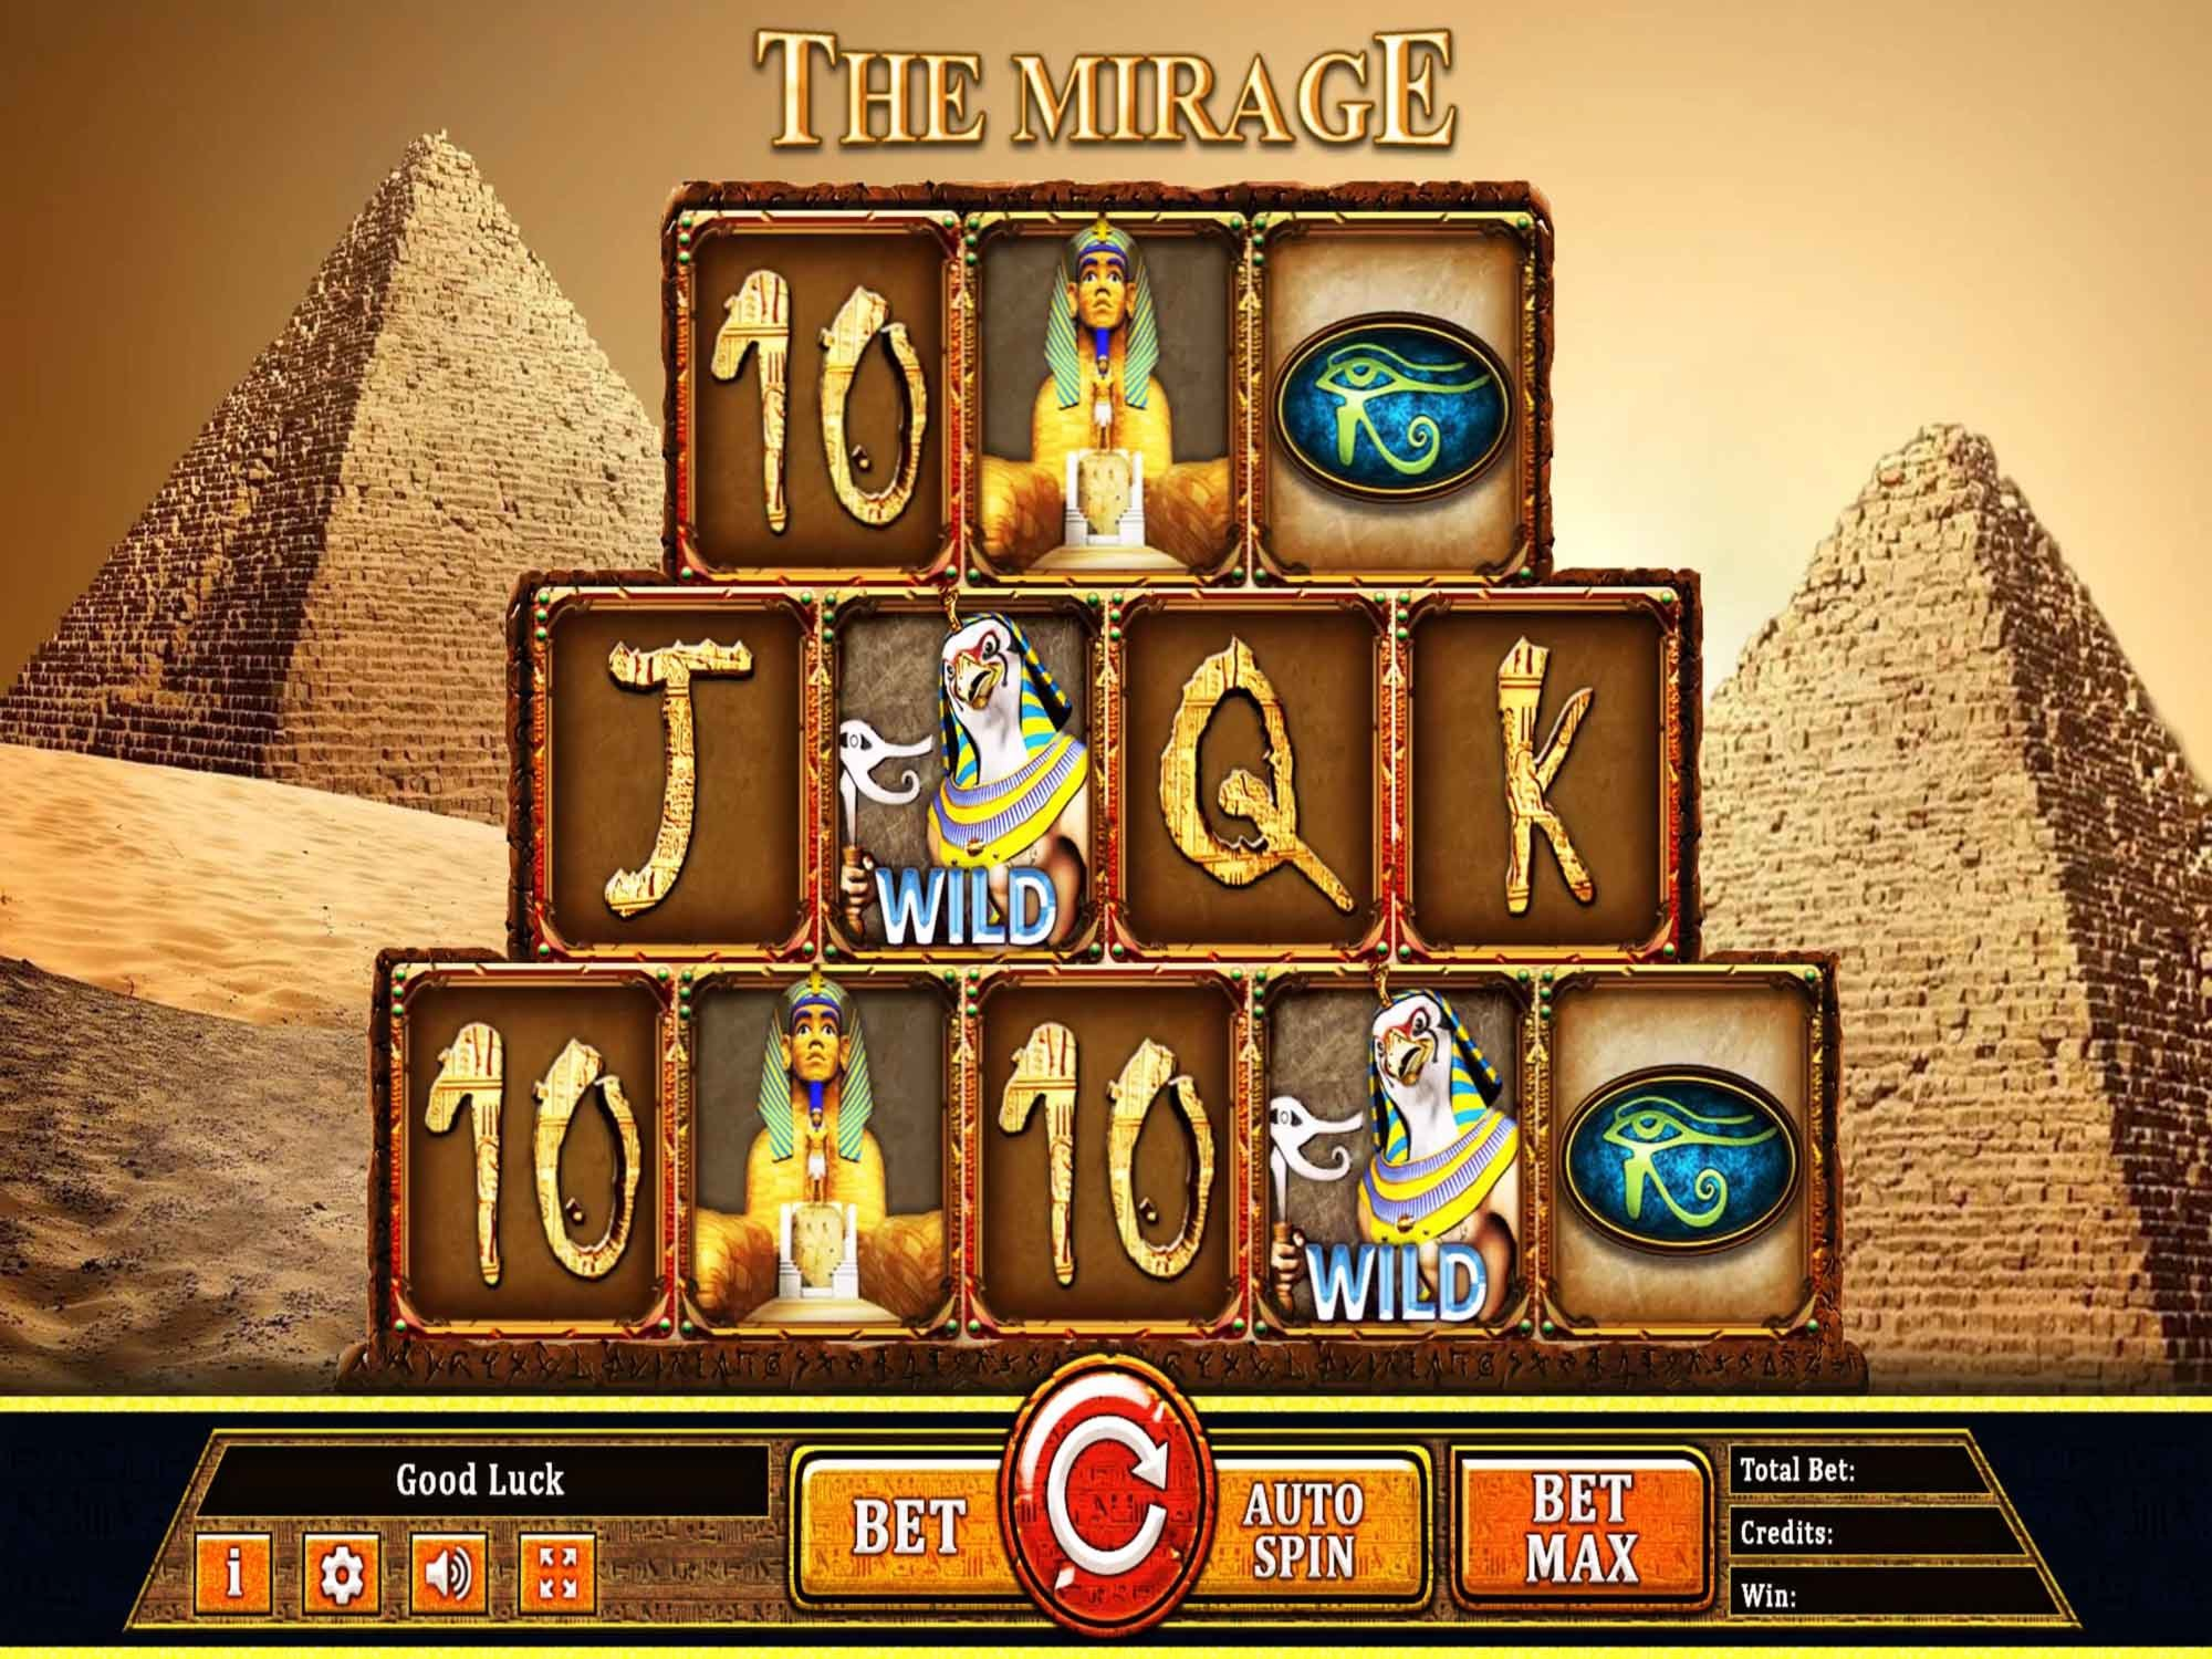 The Mirage demo